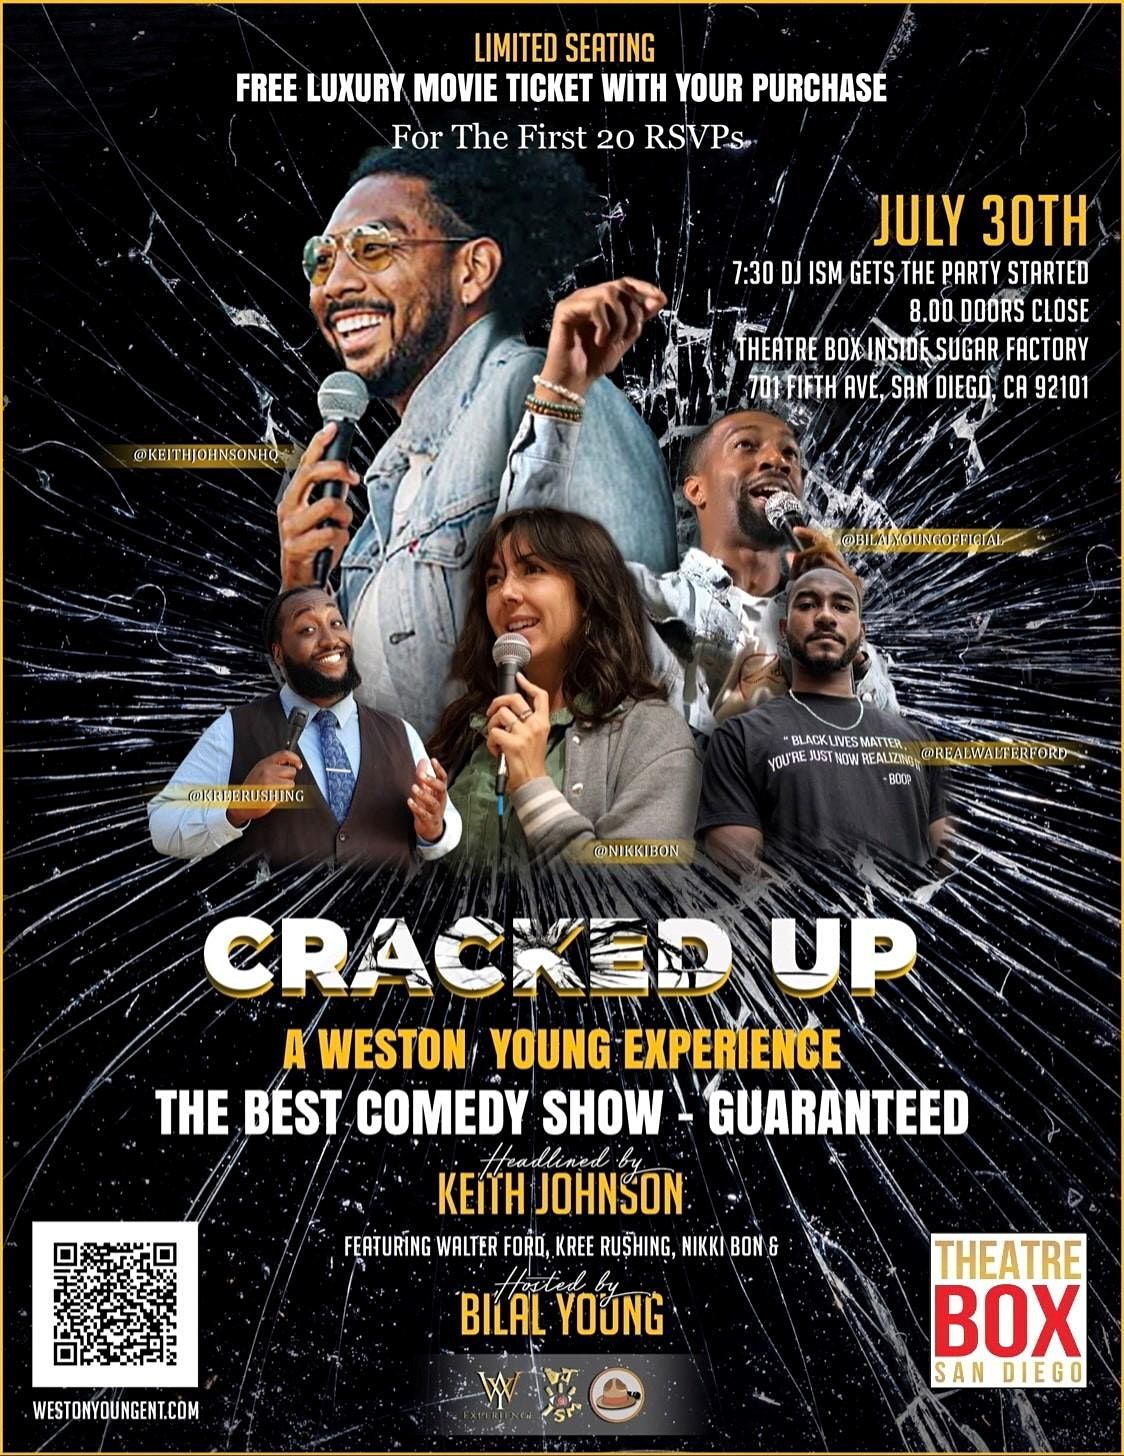 Cracked Up (Comedy Show) - A Weston Young Experience